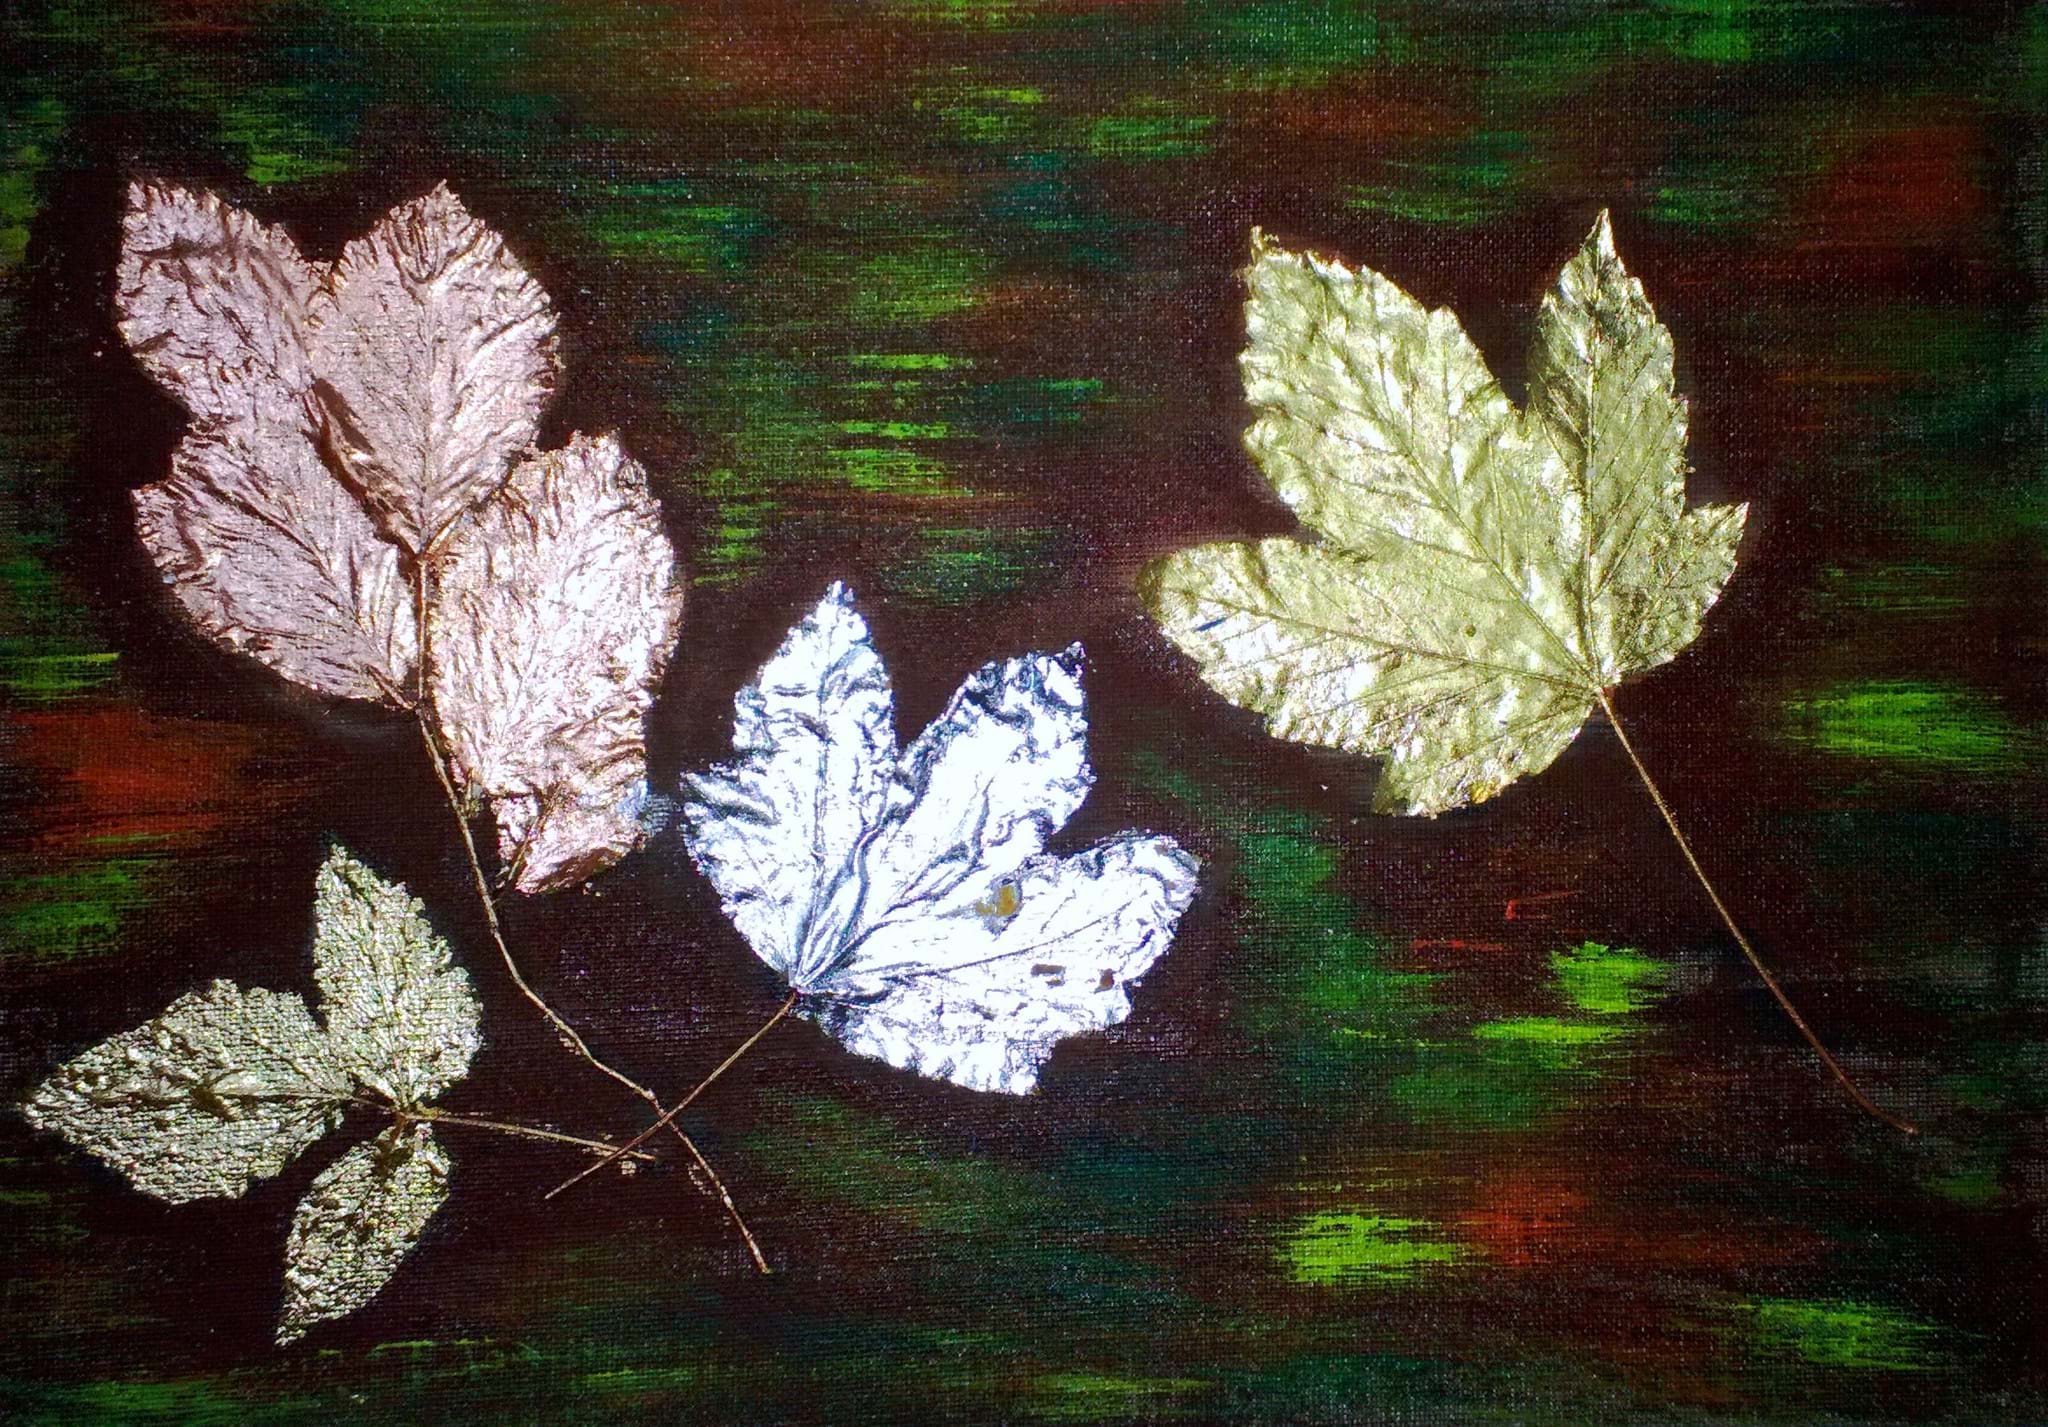 Chrigel's Art 4 You - Collage: "Noble Leaves"